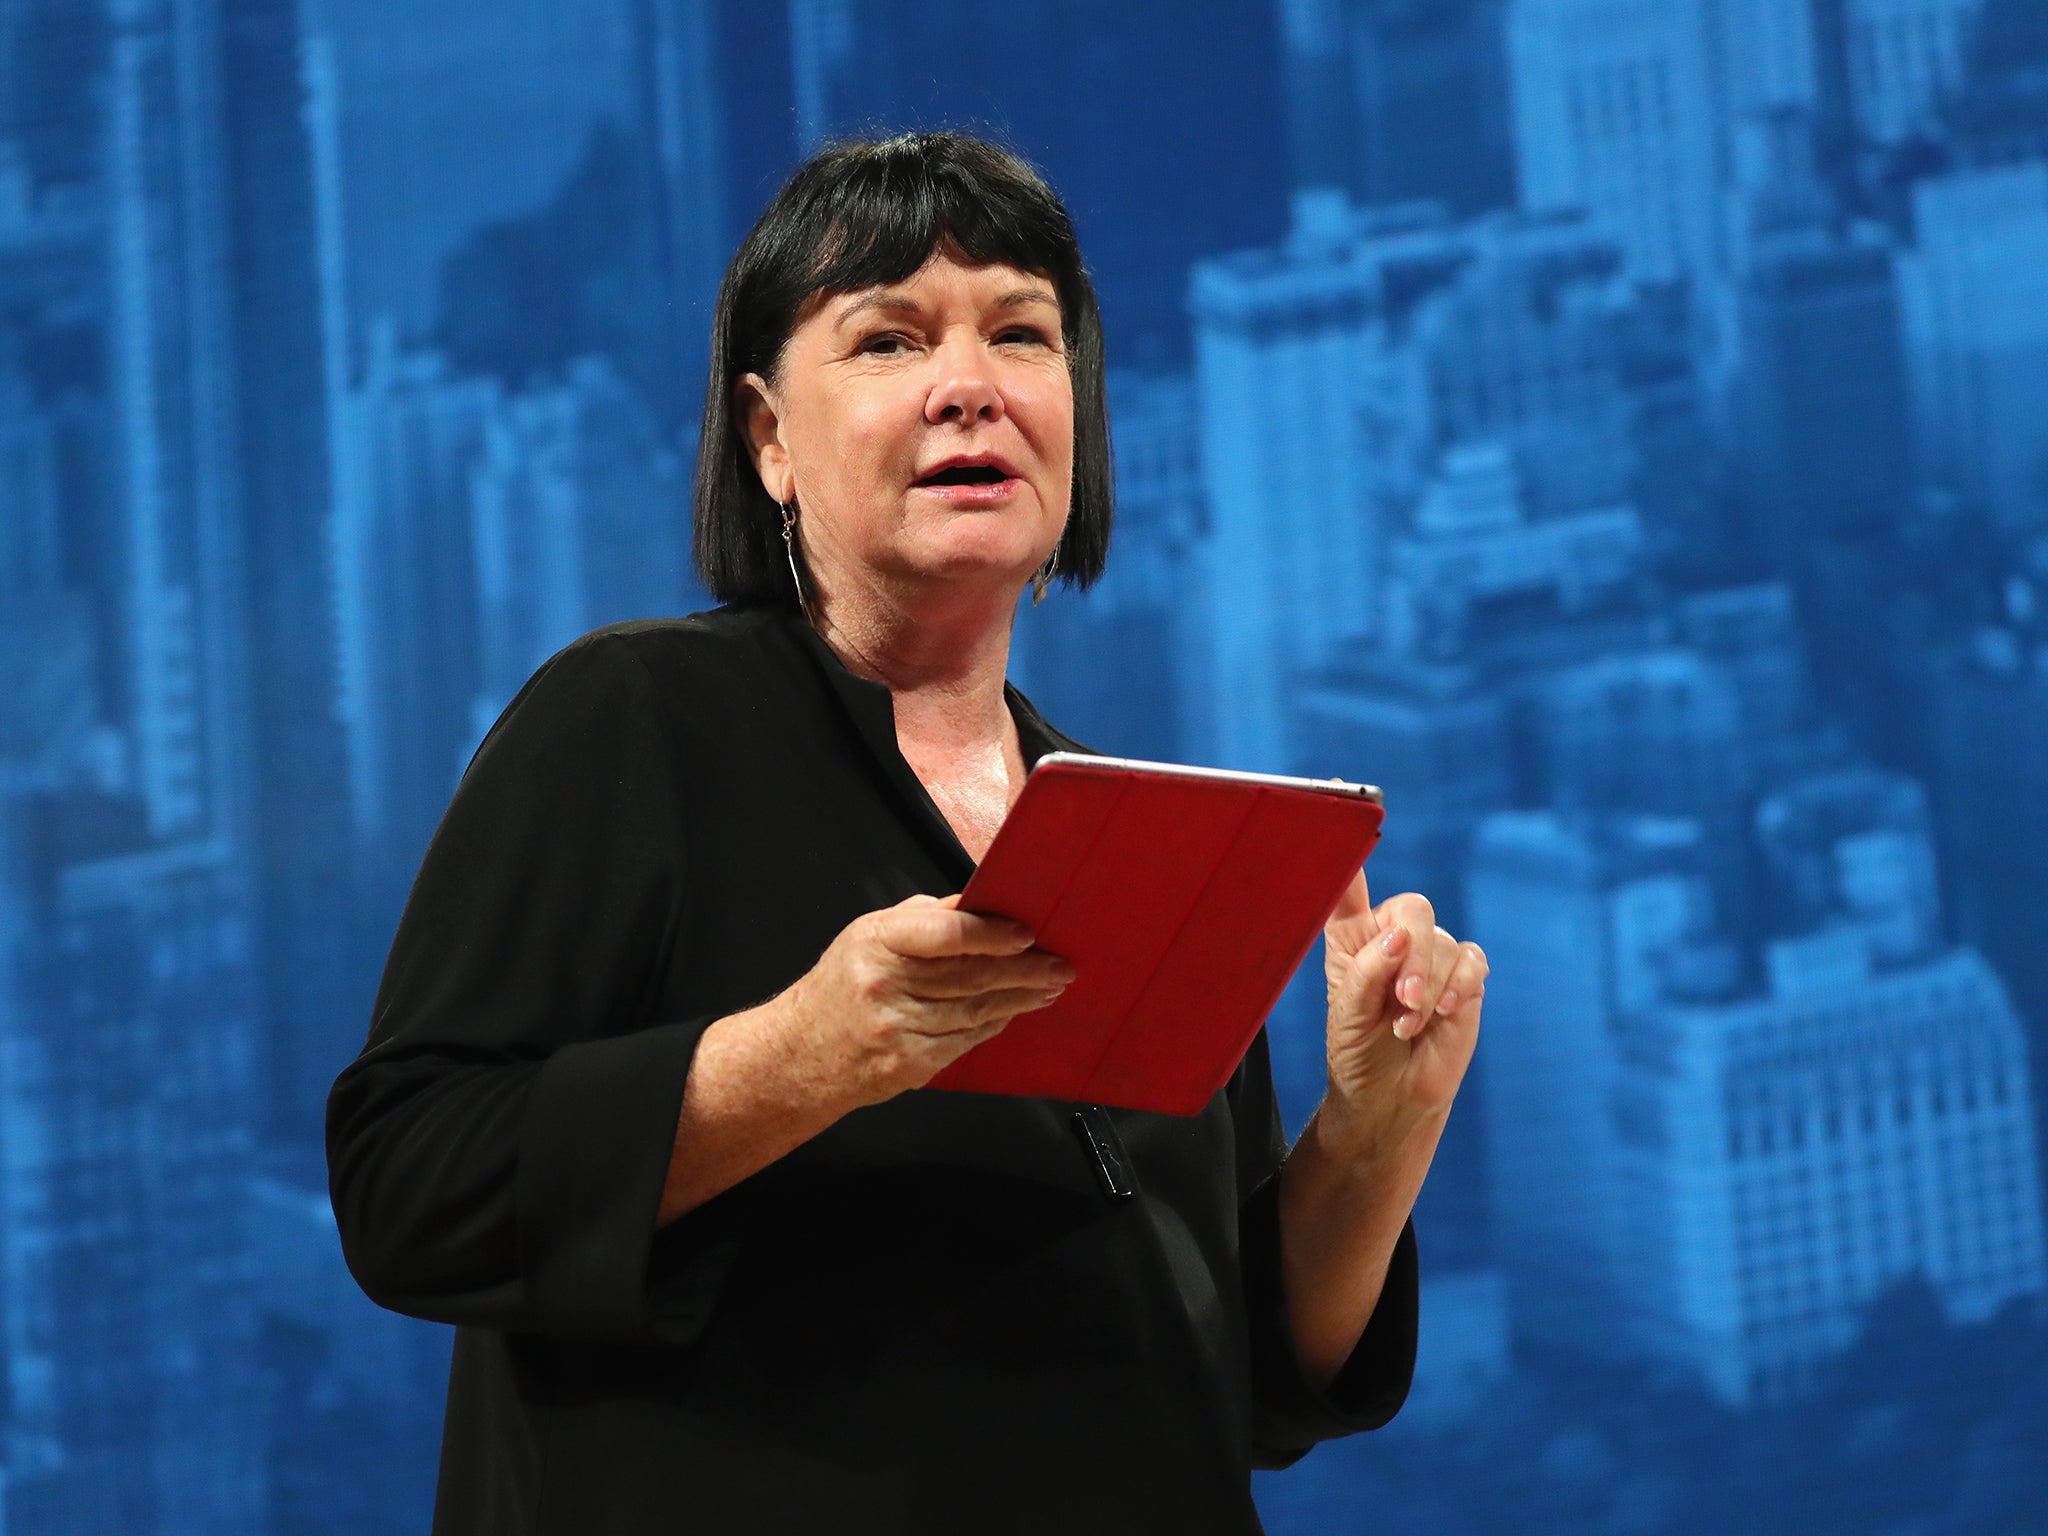 General Secretary of the International Trade Union Confederation Sharan Burrow predicted a World Cup that will honour workers' rights